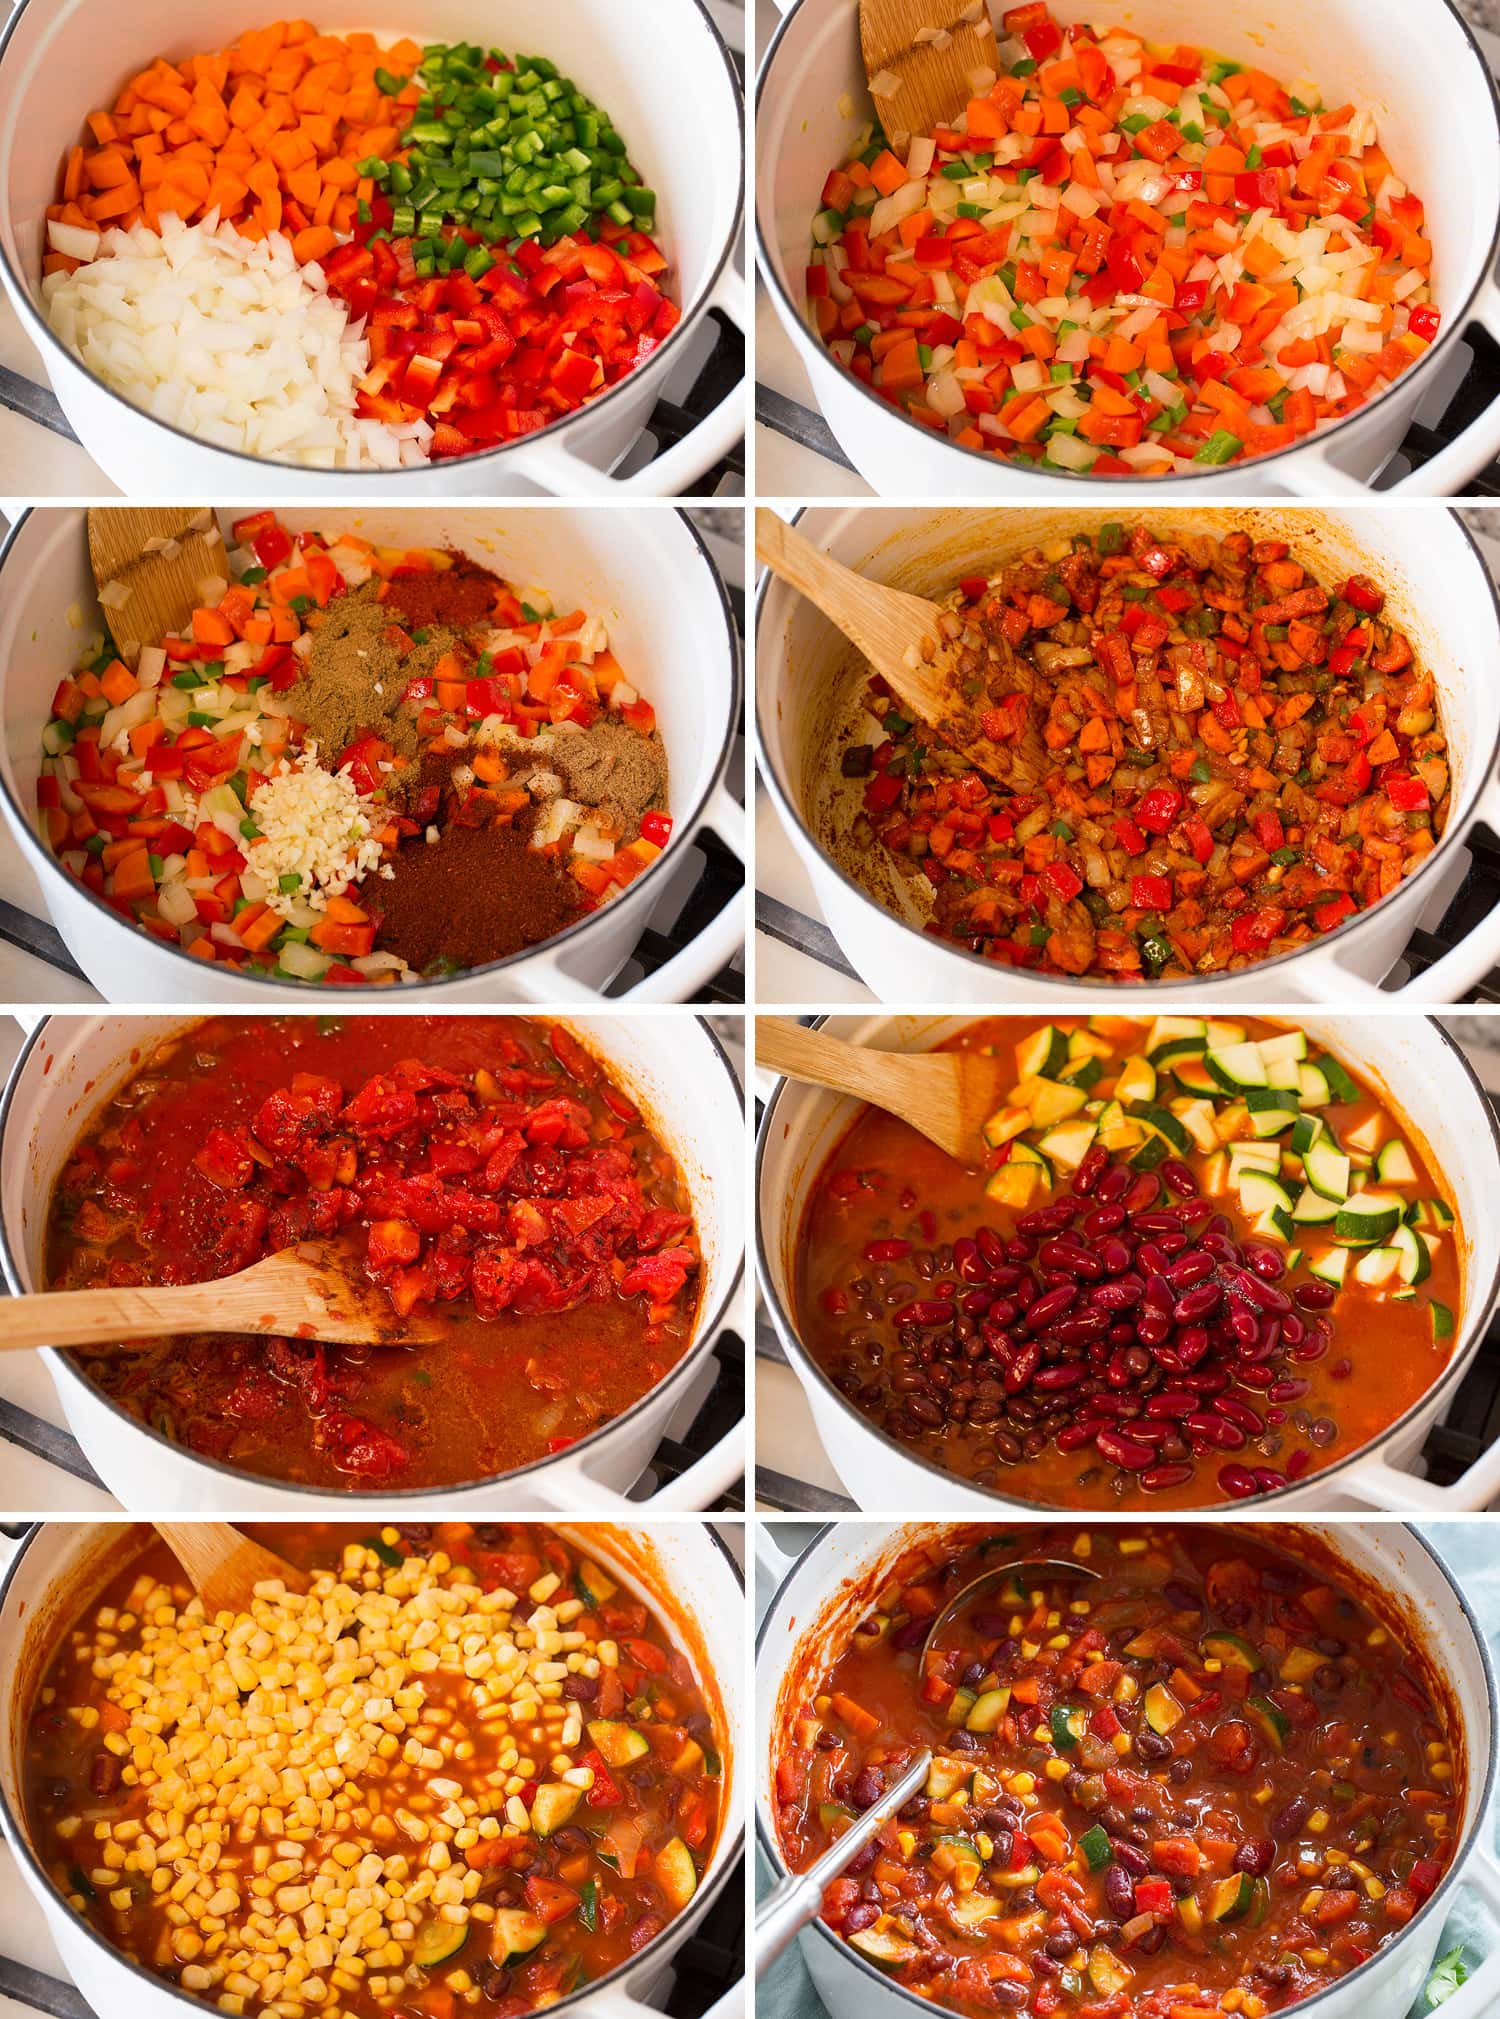 Steps showing how to make vegetarian chili in a pot on the stovetop.